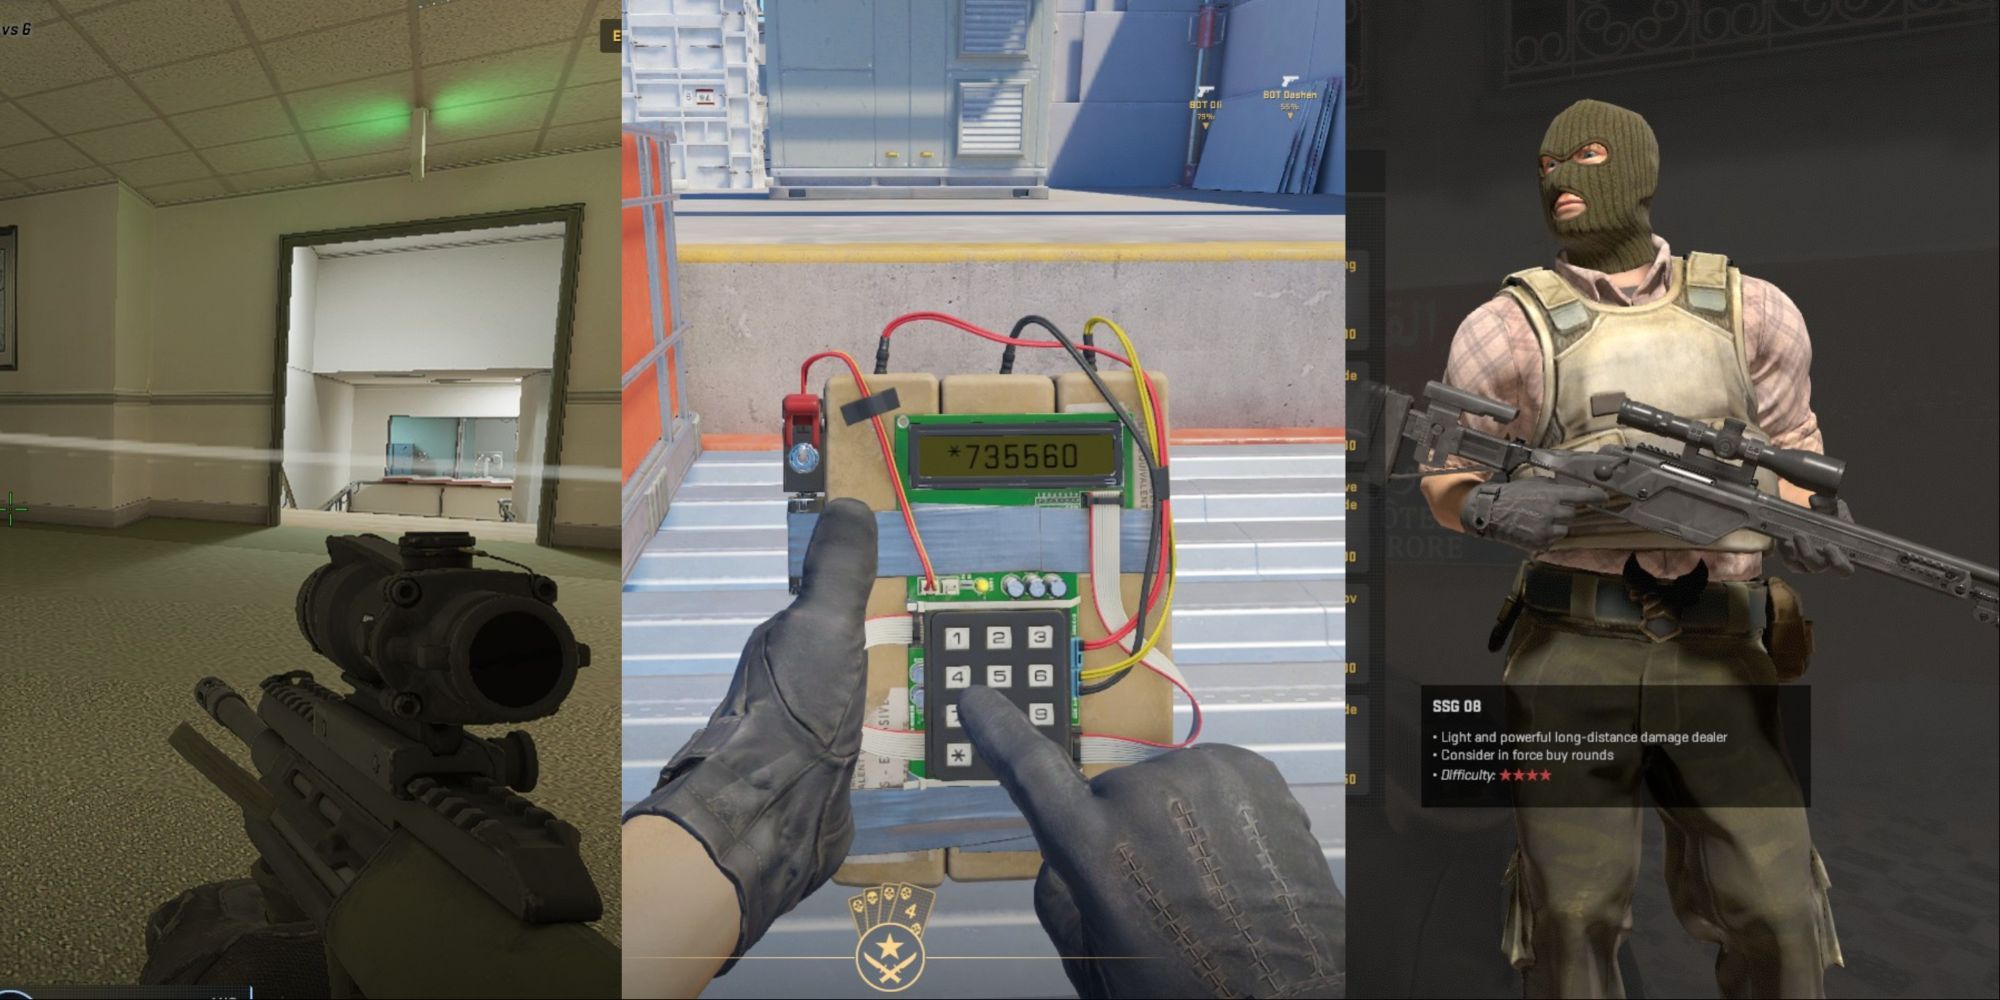 A collage showing CT gameplay with the AUG, a T-side player planting the bomb, and the T-side soldier inside the buying menu in CS2.